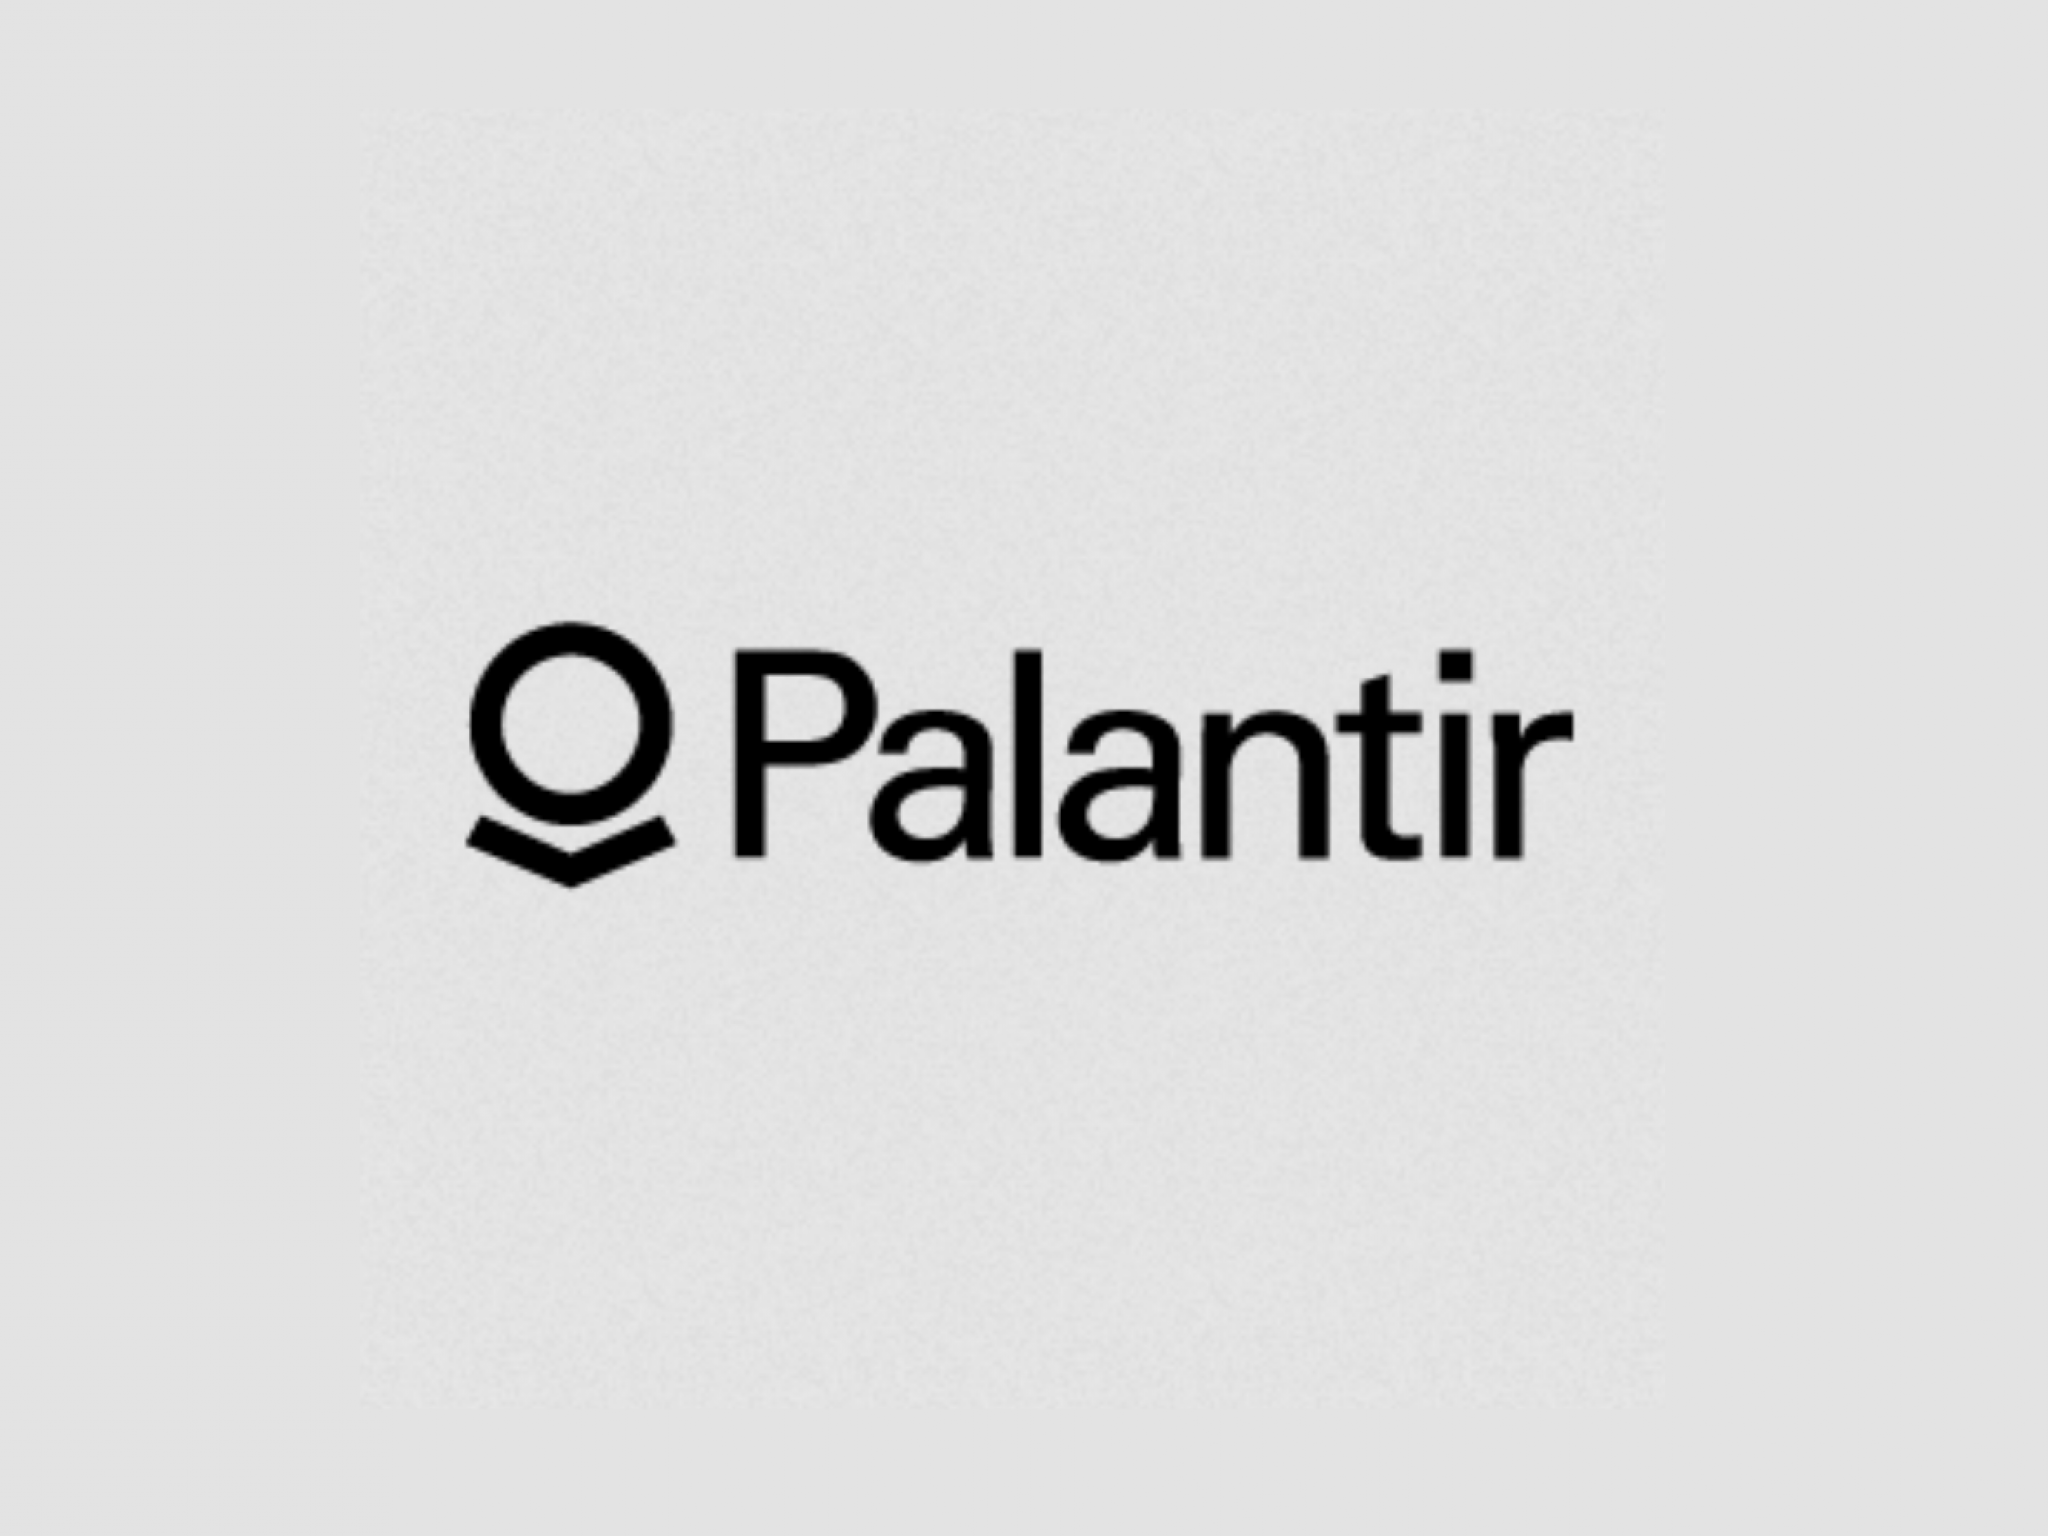  palantir-and-pwc-team-up-to-accelerate-data-driven-operations-openai-rival-secures-billions-in-big-tech-backing-six-us-states-brace-for-healthcare-strike-todays-top-stories 